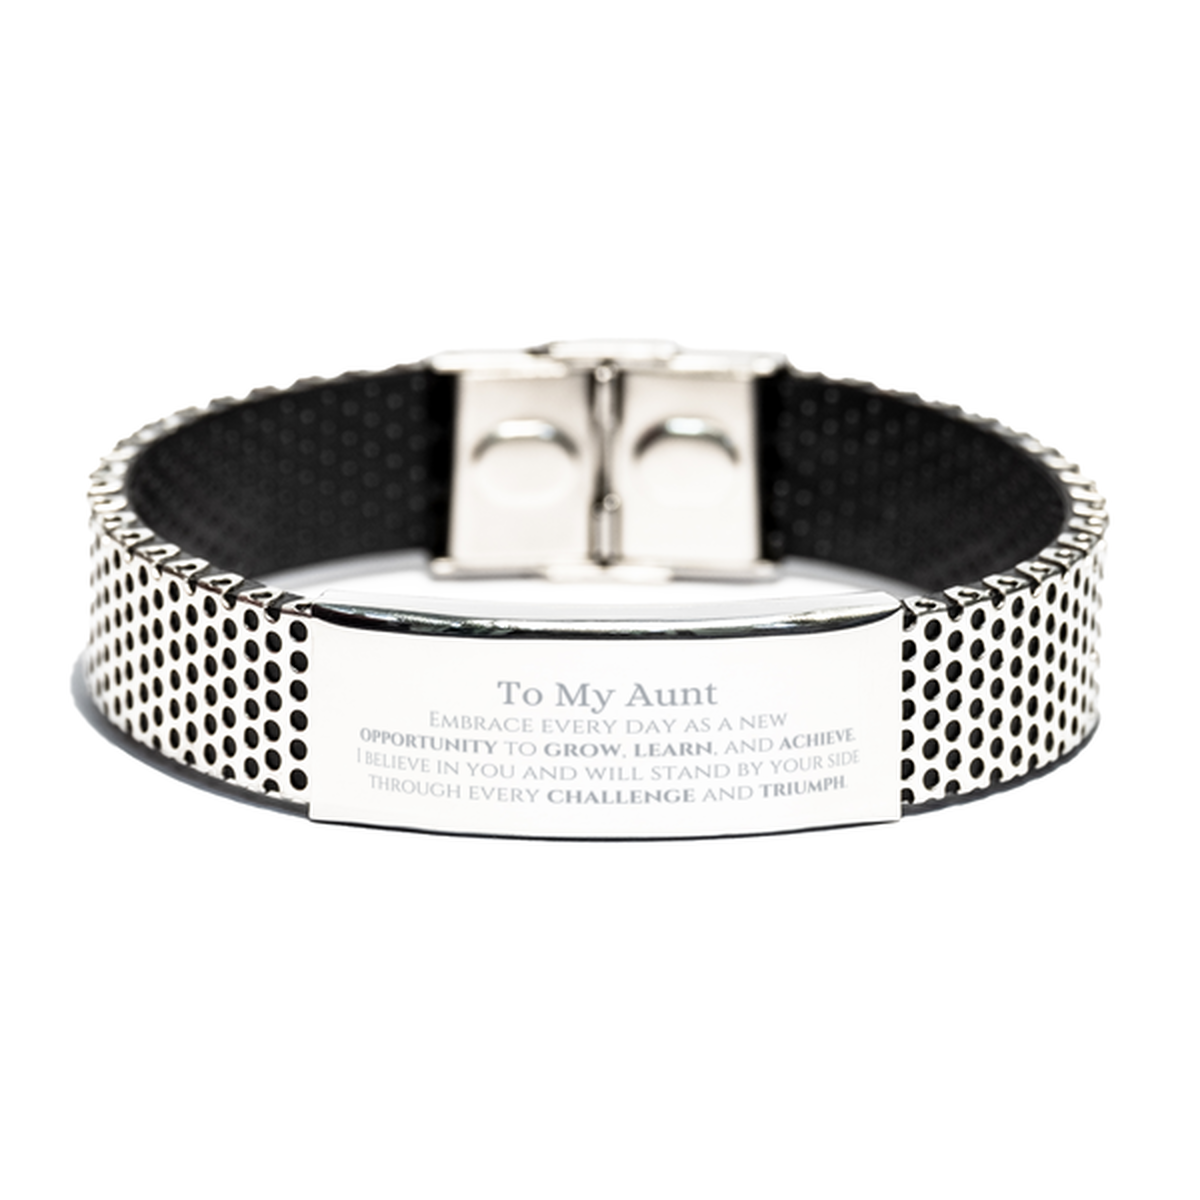 To My Aunt Gifts, I believe in you and will stand by your side, Inspirational Stainless Steel Bracelet For Aunt, Birthday Christmas Motivational Aunt Gifts